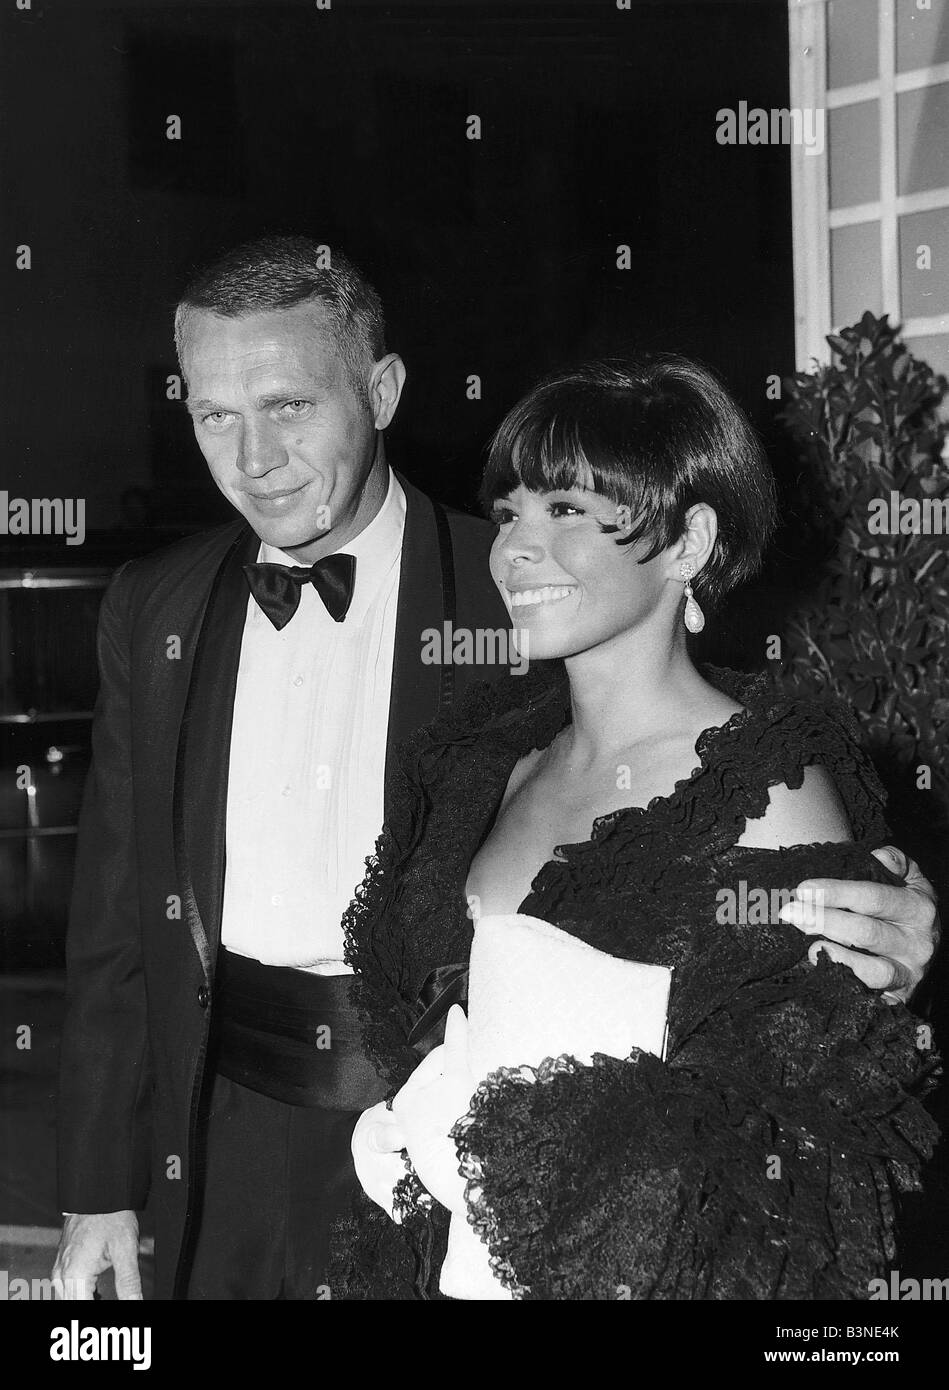 Steve McQueen Actor with his wife Stock Photo